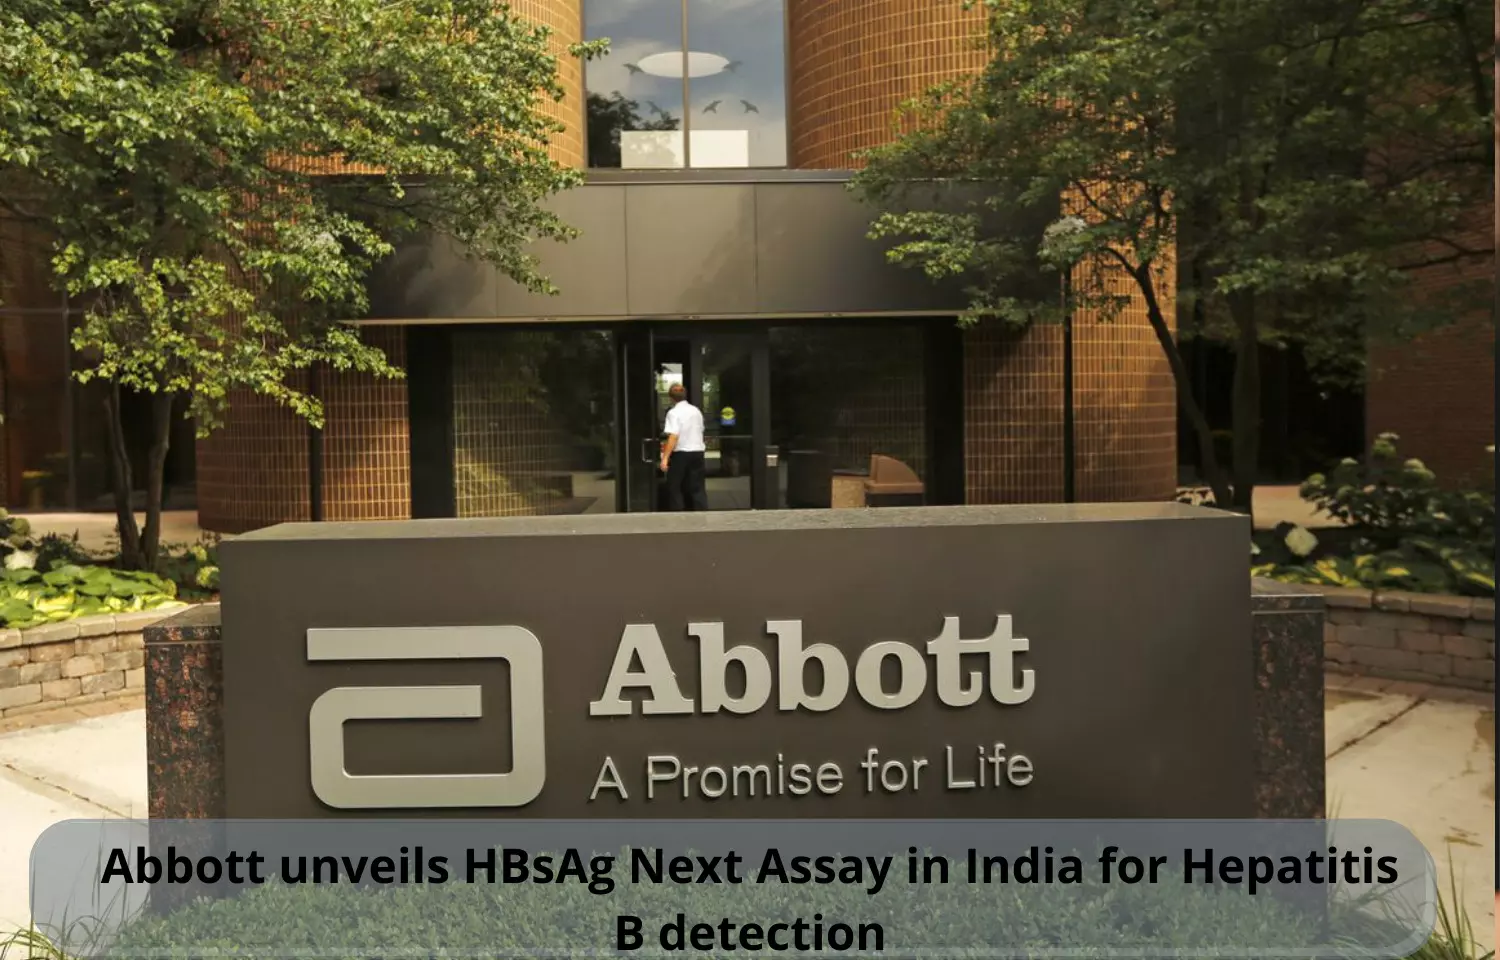 Abbott launches HBsAg Next Assay in India for Hepatitis B detection